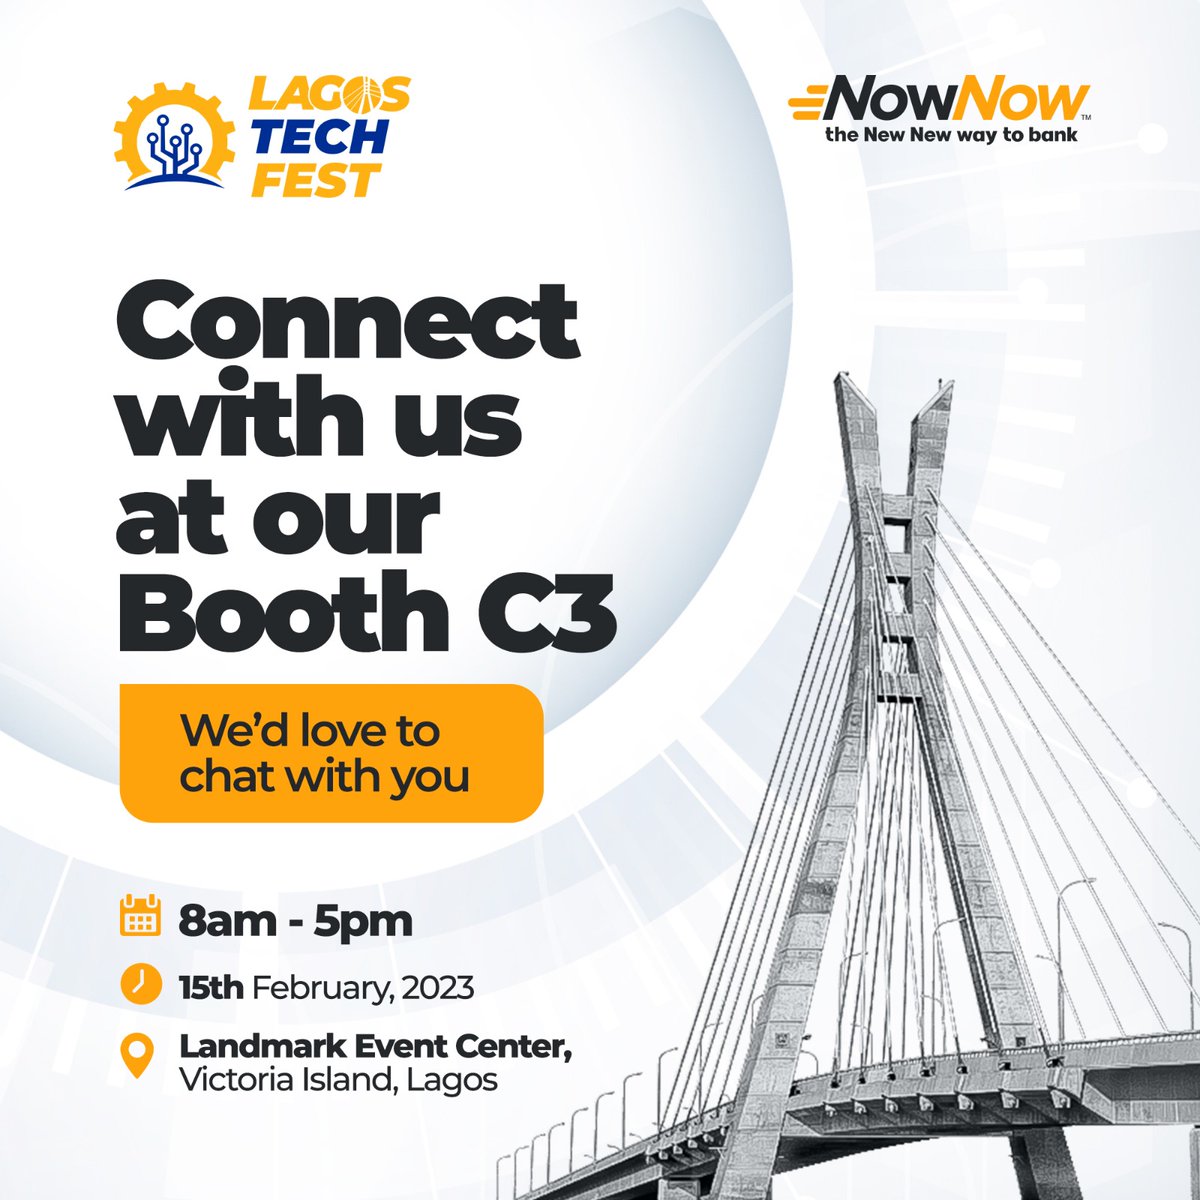 Join us today at the Lagos Tech Fest, Booth C3.
📍 Landmark Event Center
📅 15th February 2023
🕗 8:00 am

#nownow #nownowapp #techfest #landmarkevent #lagostechfest #financialsolution #business #finance